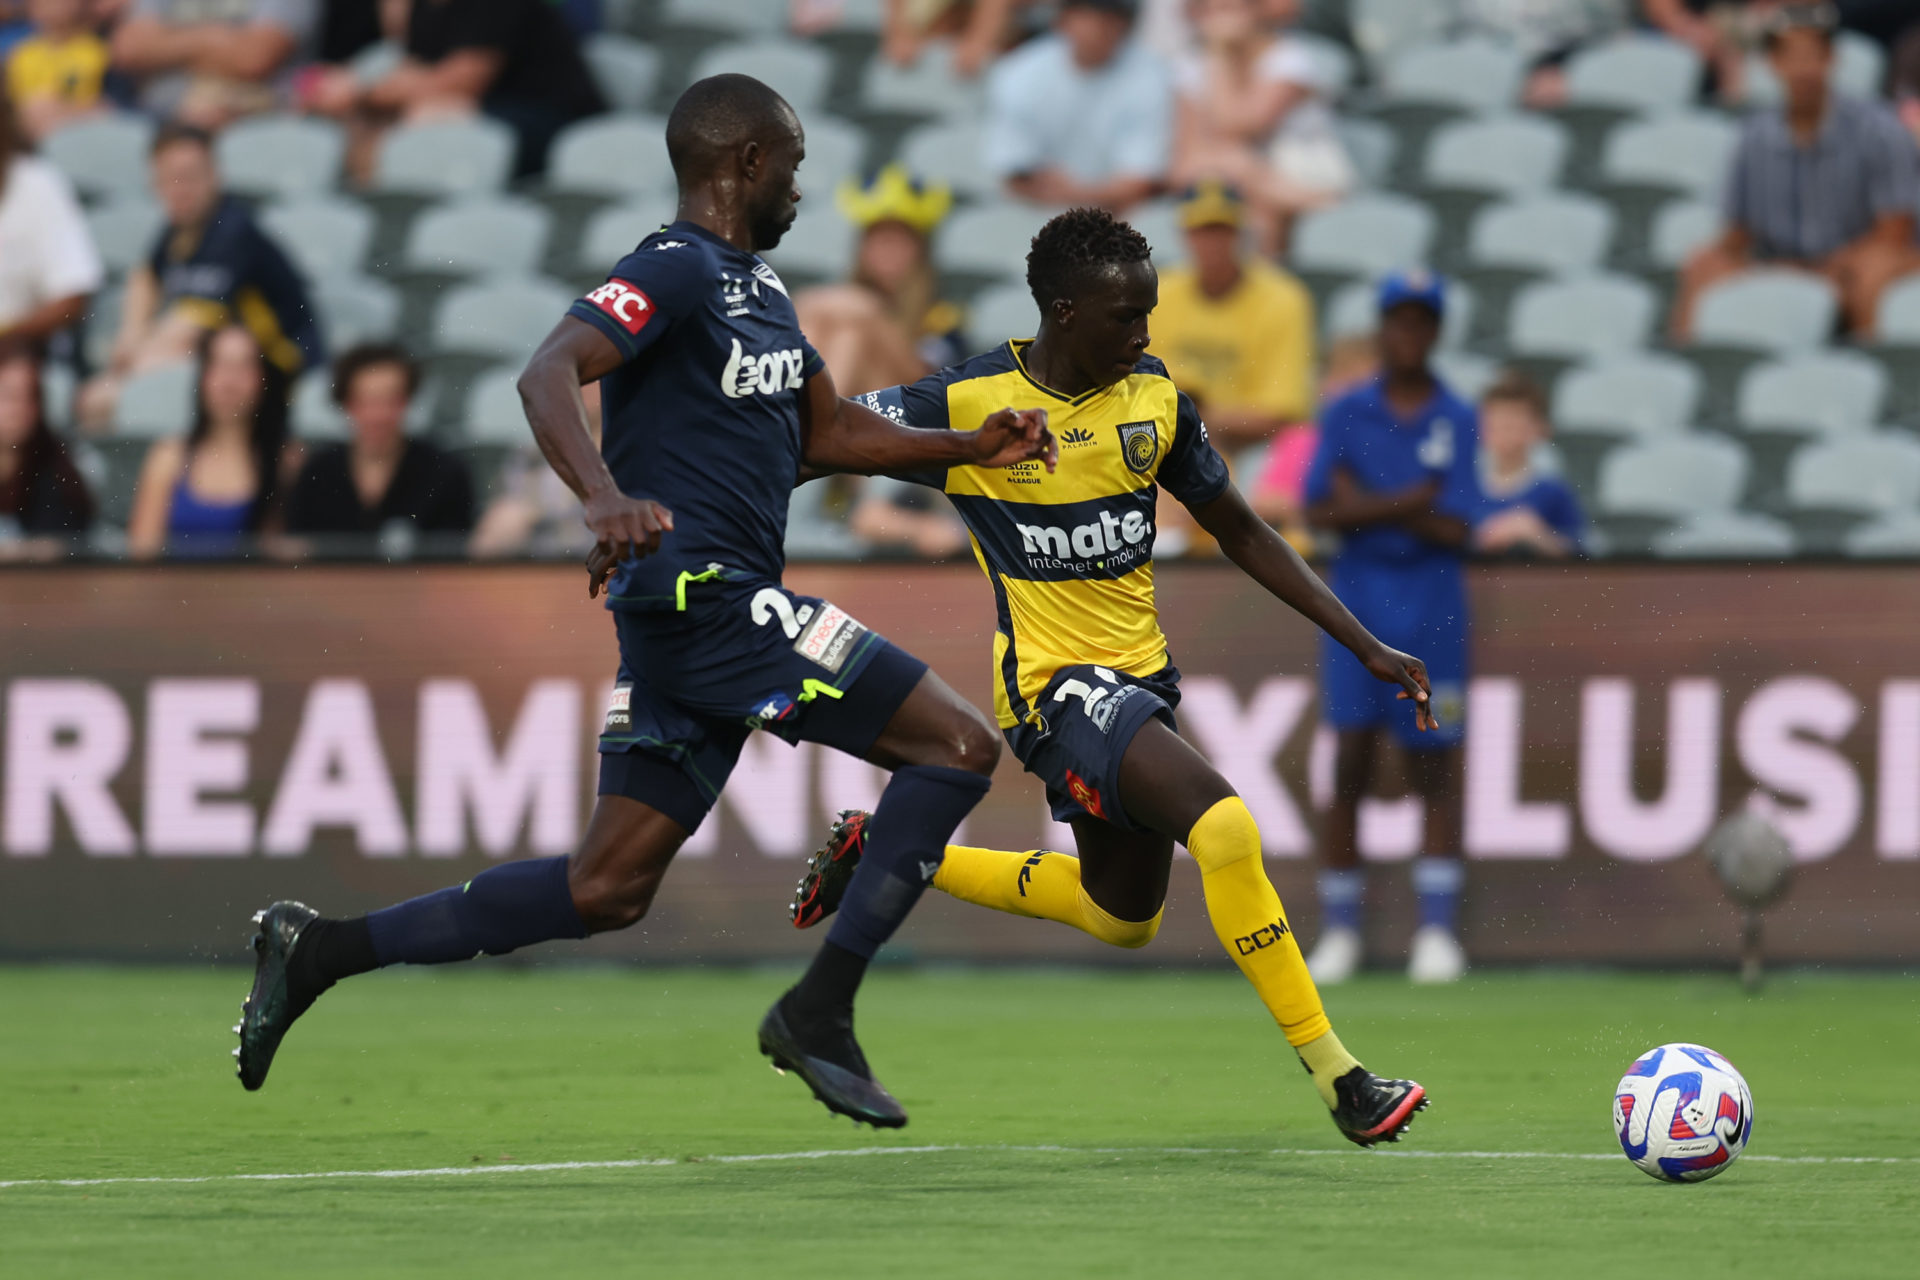 A-League Men's Rd 10 - Central Coast Mariners v Melbourne Victory